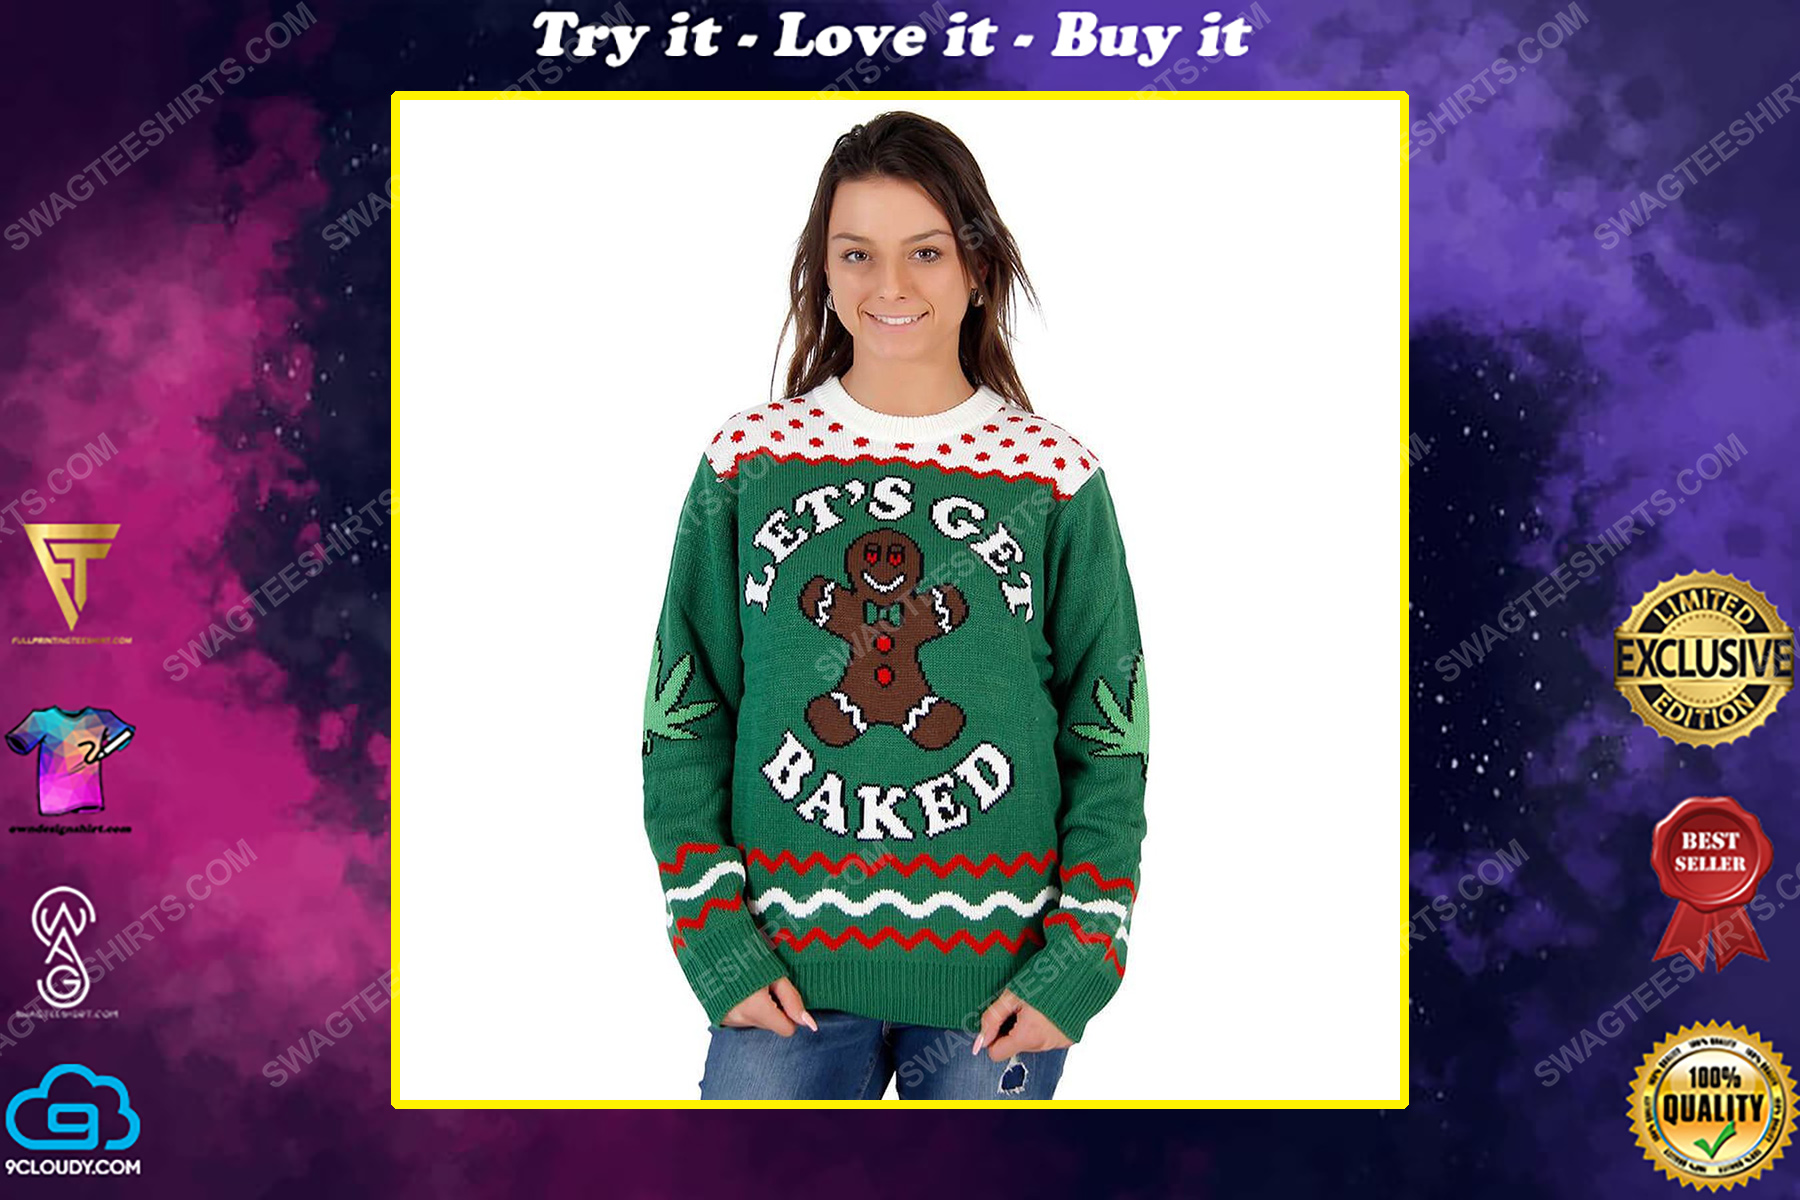 Let's get baked happy gingerbread ugly christmas sweater